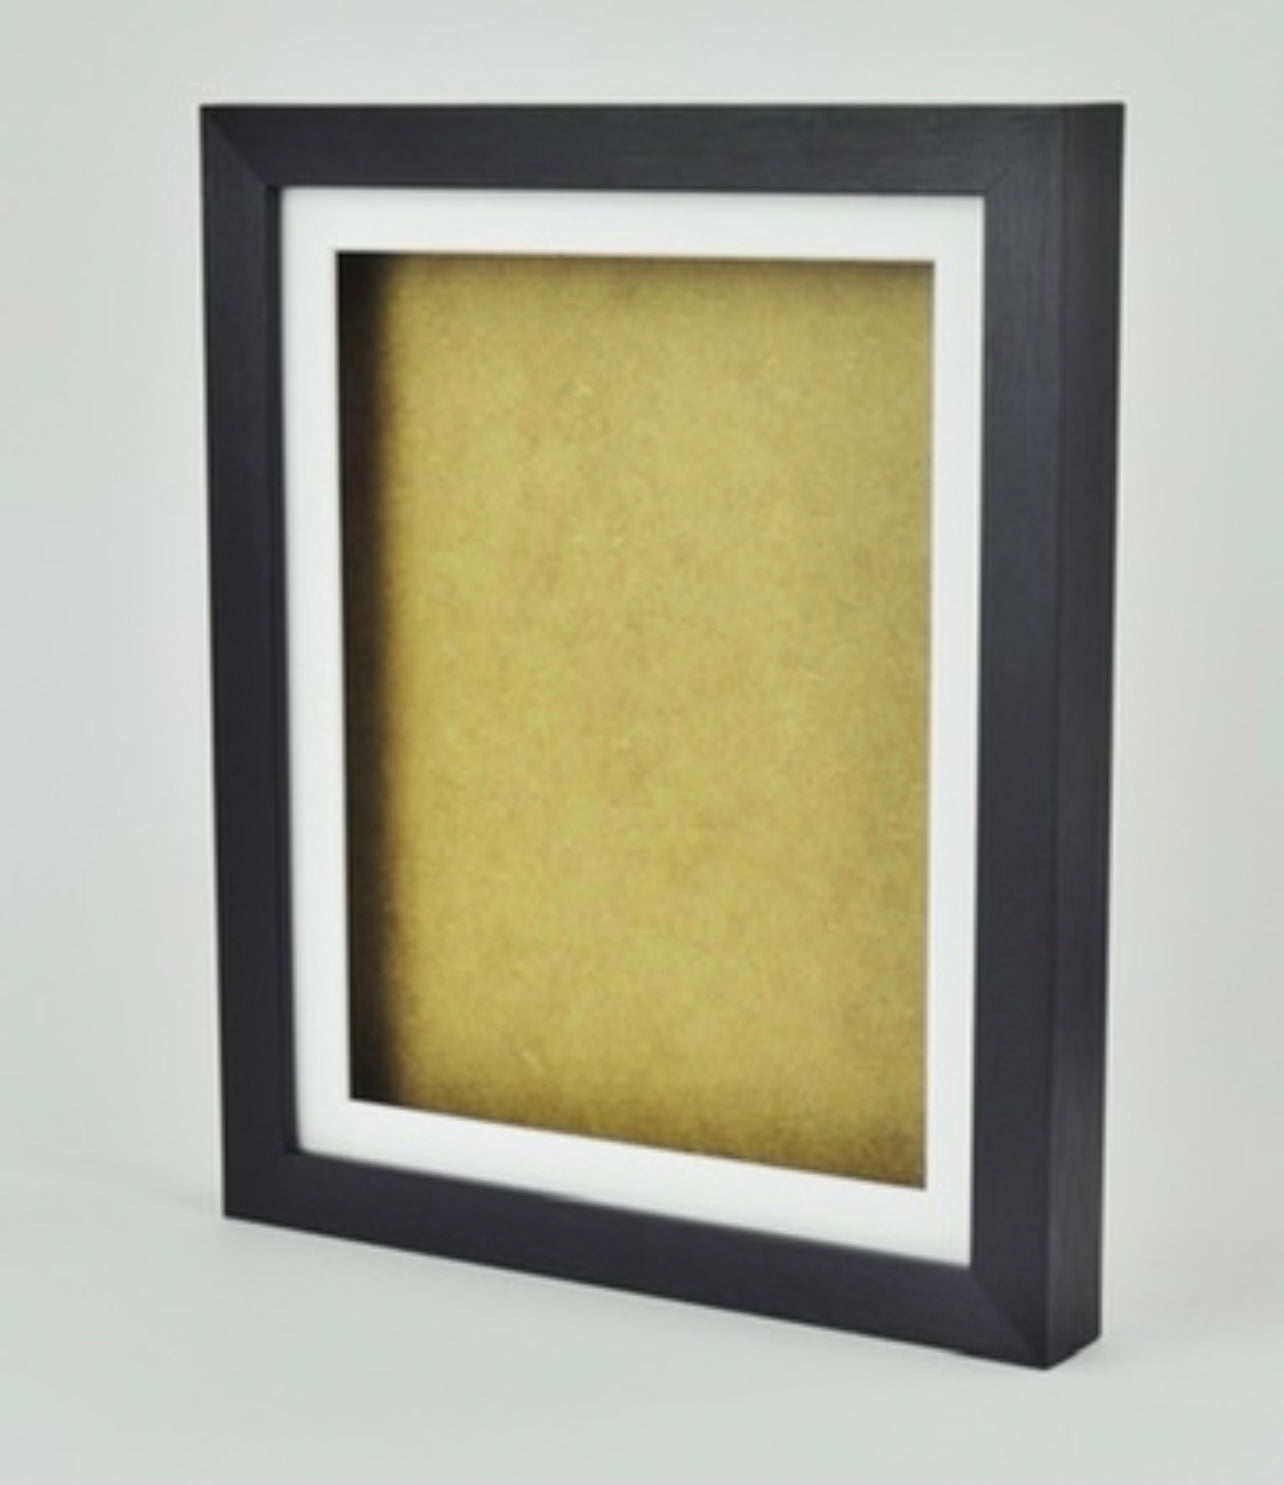 Wooden mounted frame